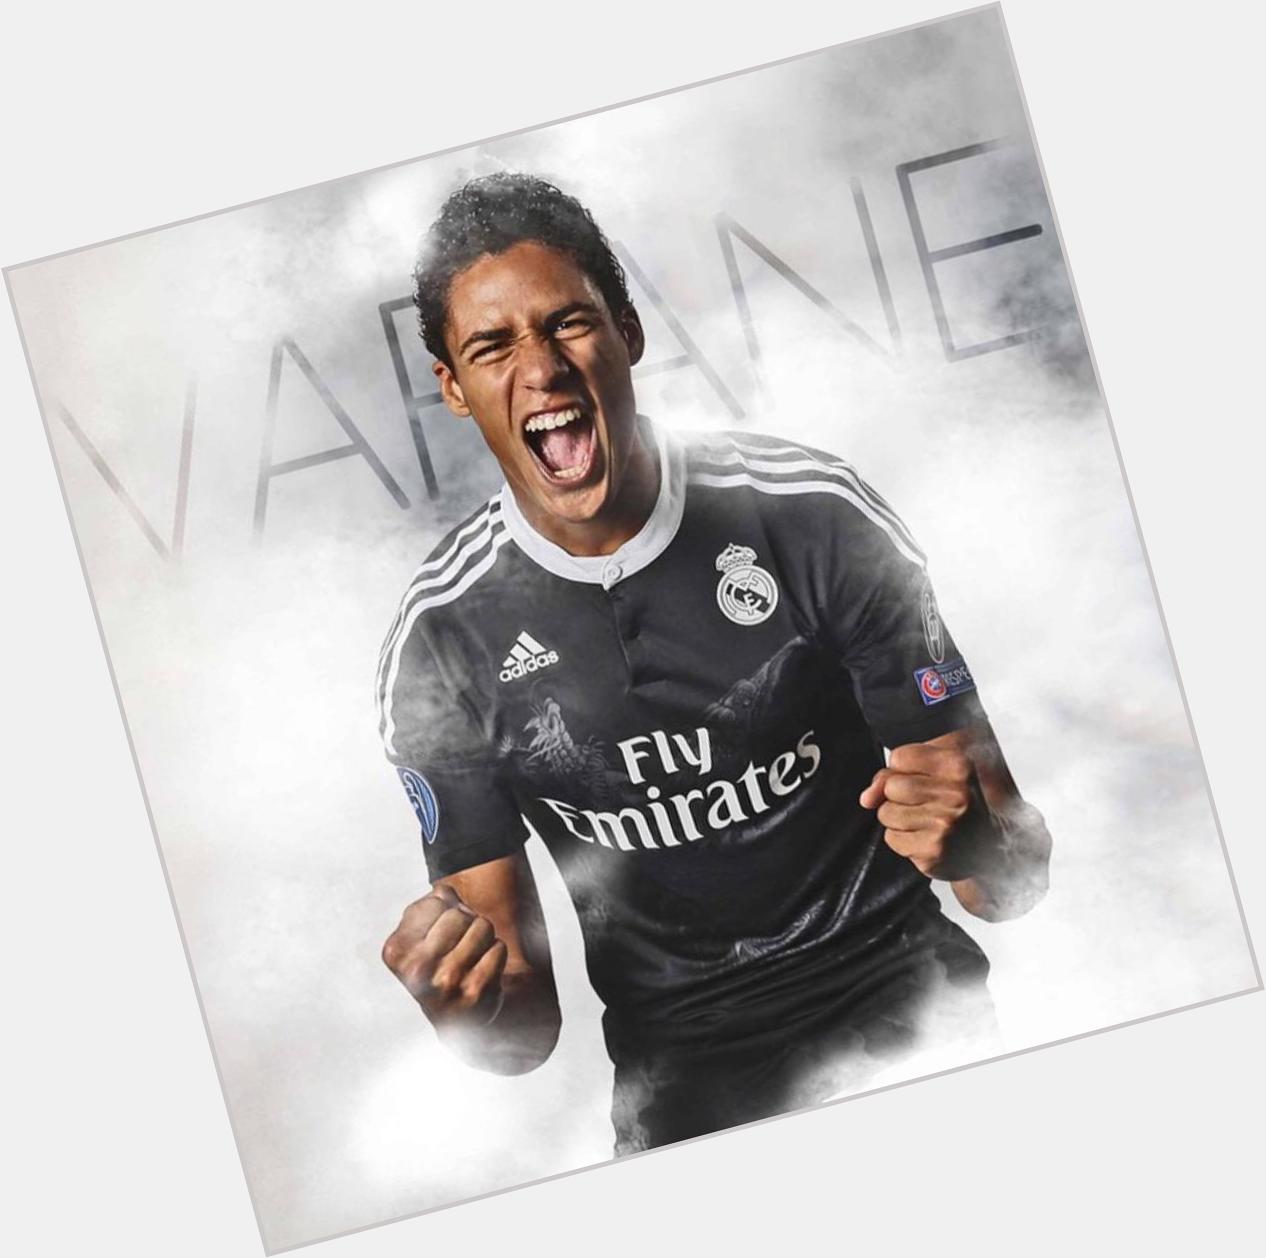 Happy Birthday to Raphaël Varane who turns 22 today! HAPPY BIRTHDAY TO THE BEST YOUNG DEFENDER! 